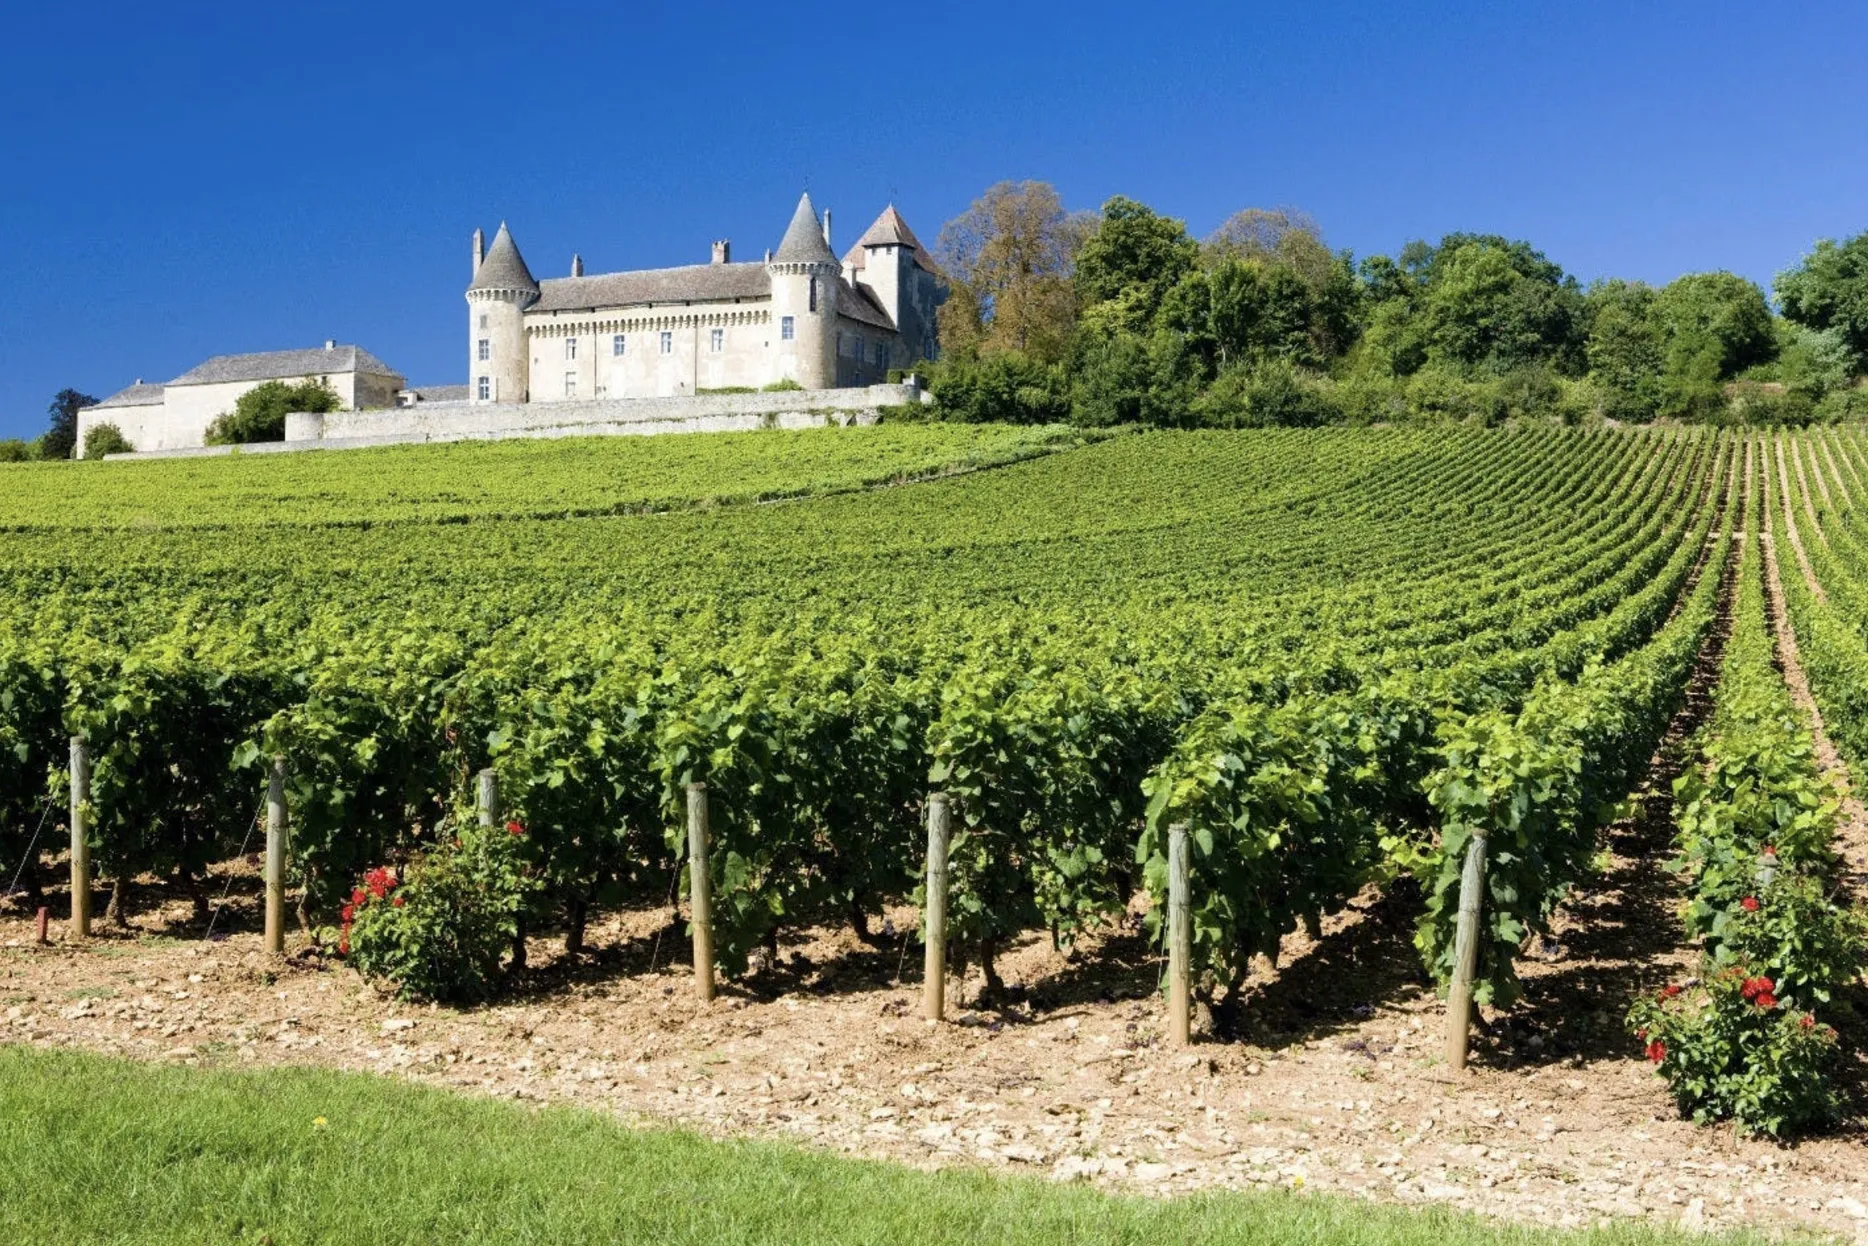 Overlooking beautiful vines up to the impressive Villemenant castle in the Loire Valley, France